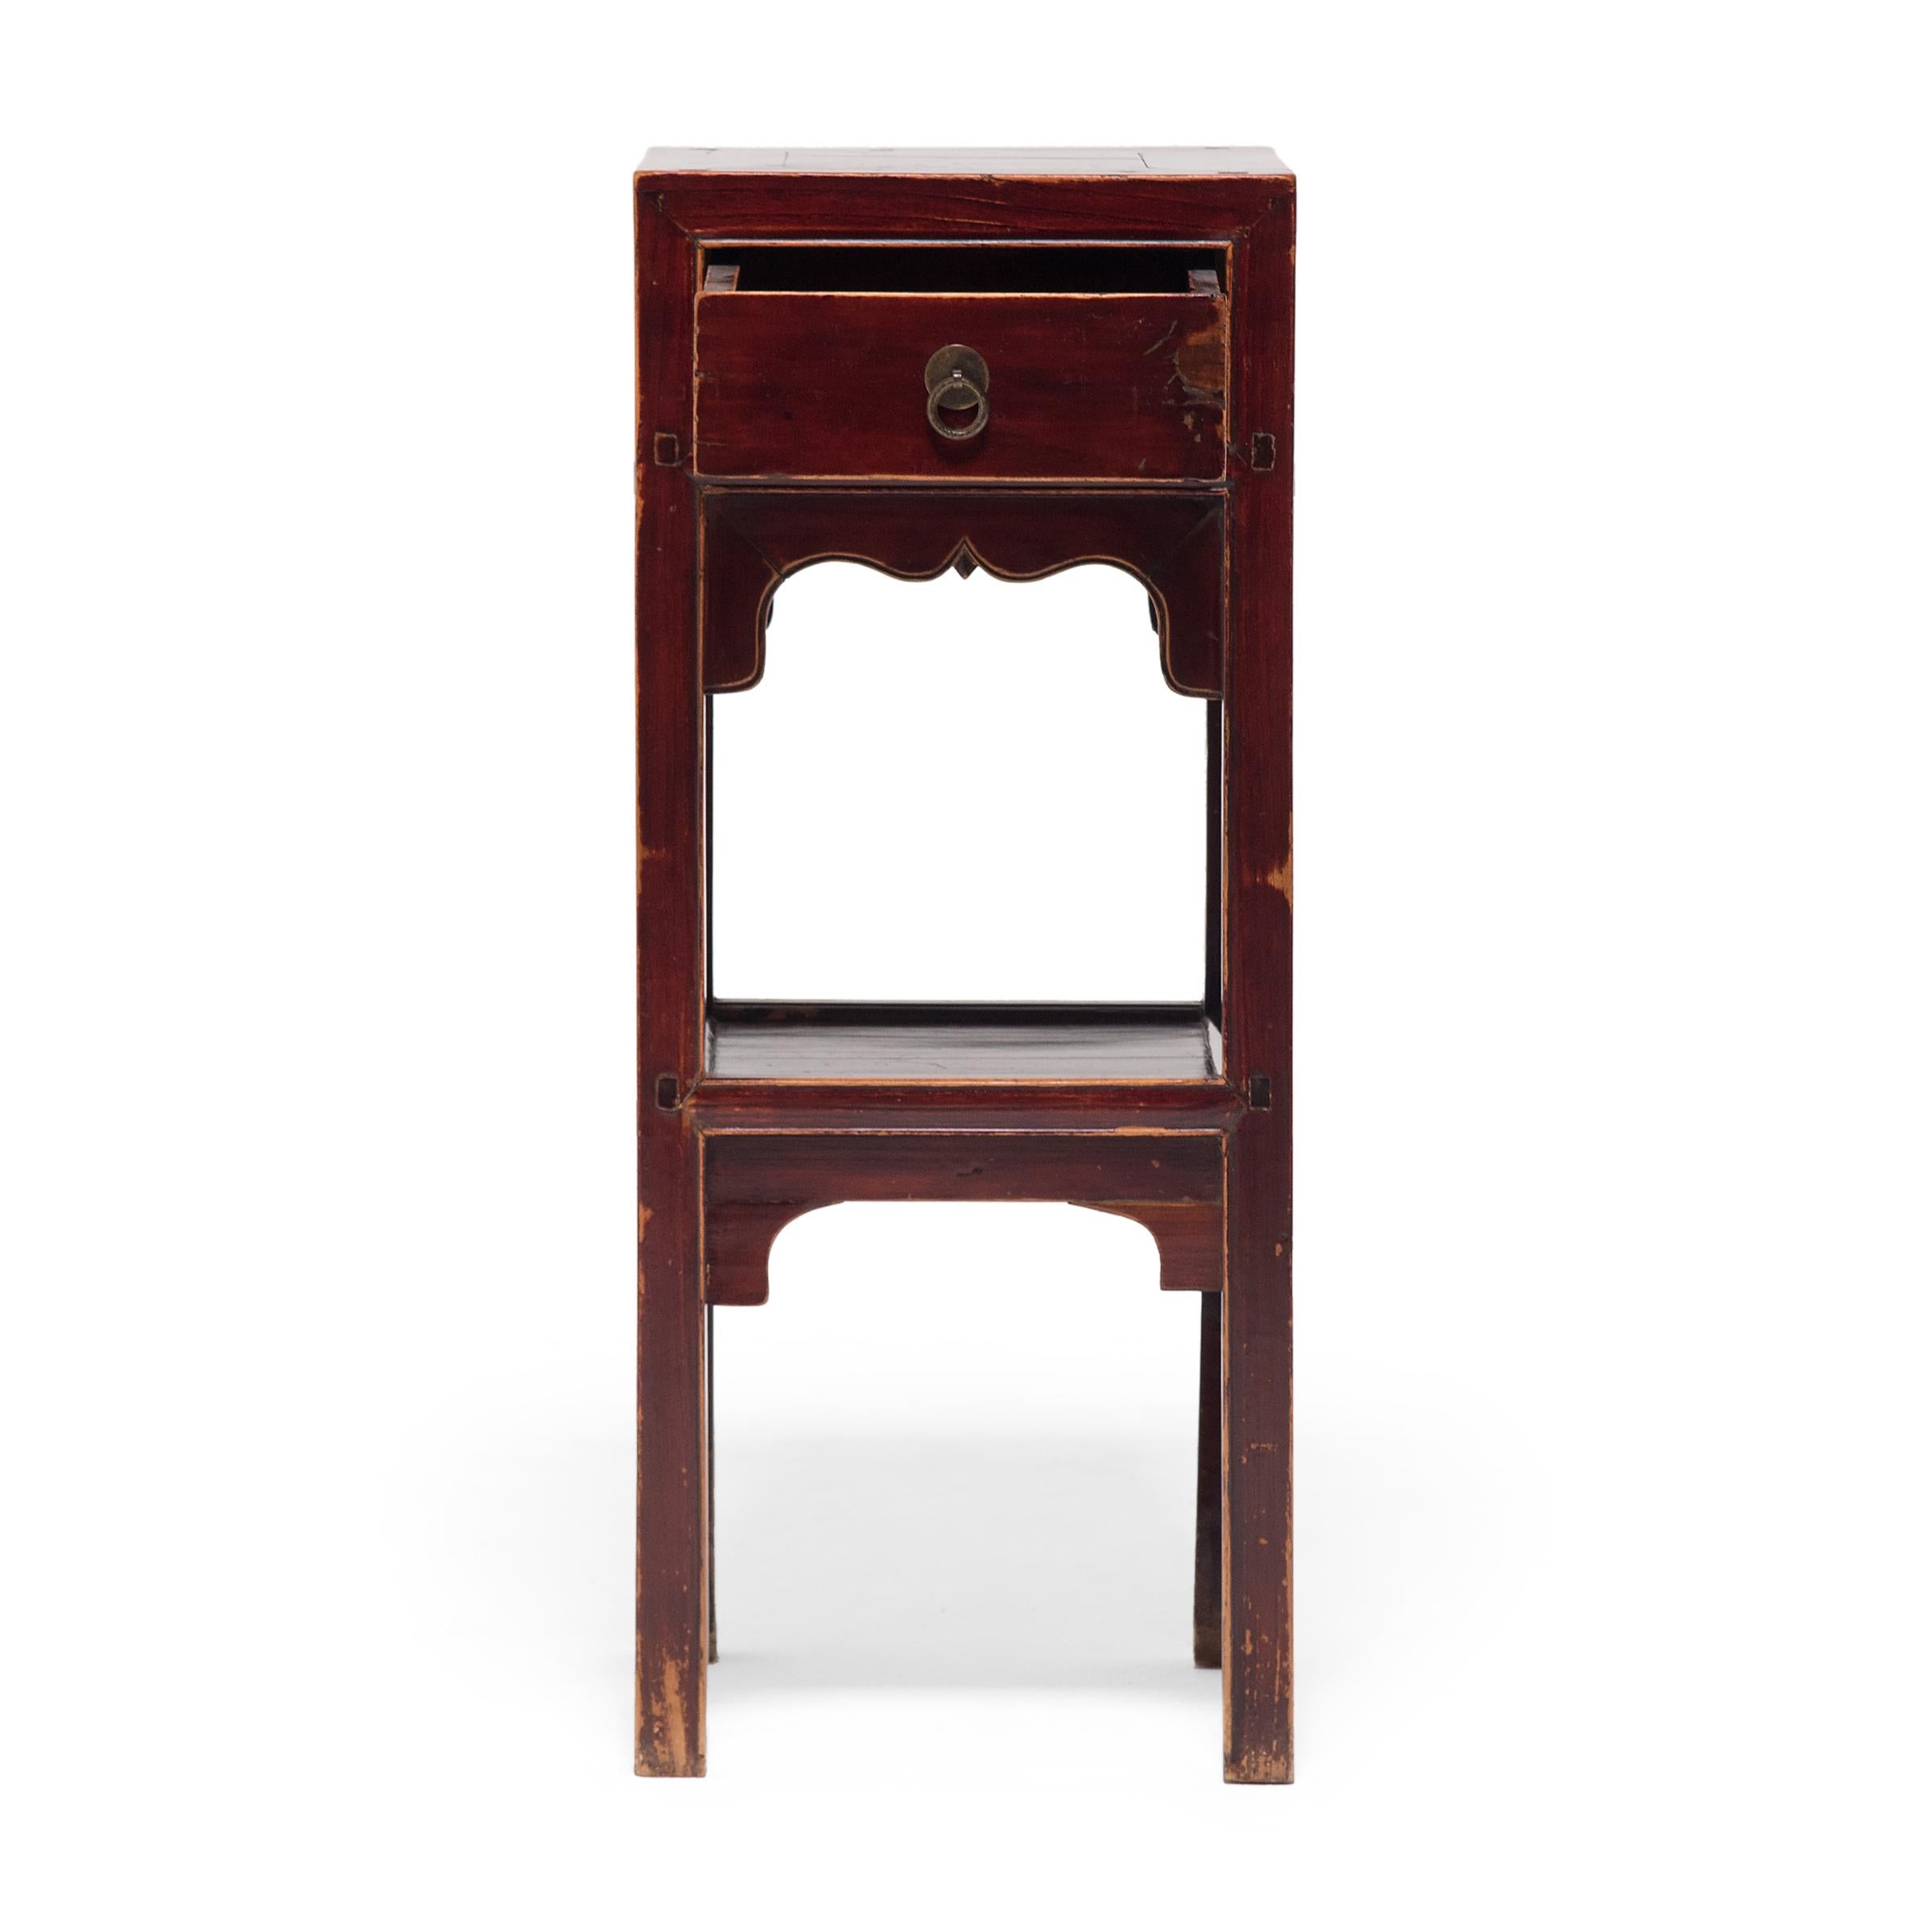 19th Century Pair of Chinese Square Display Stands, c. 1850